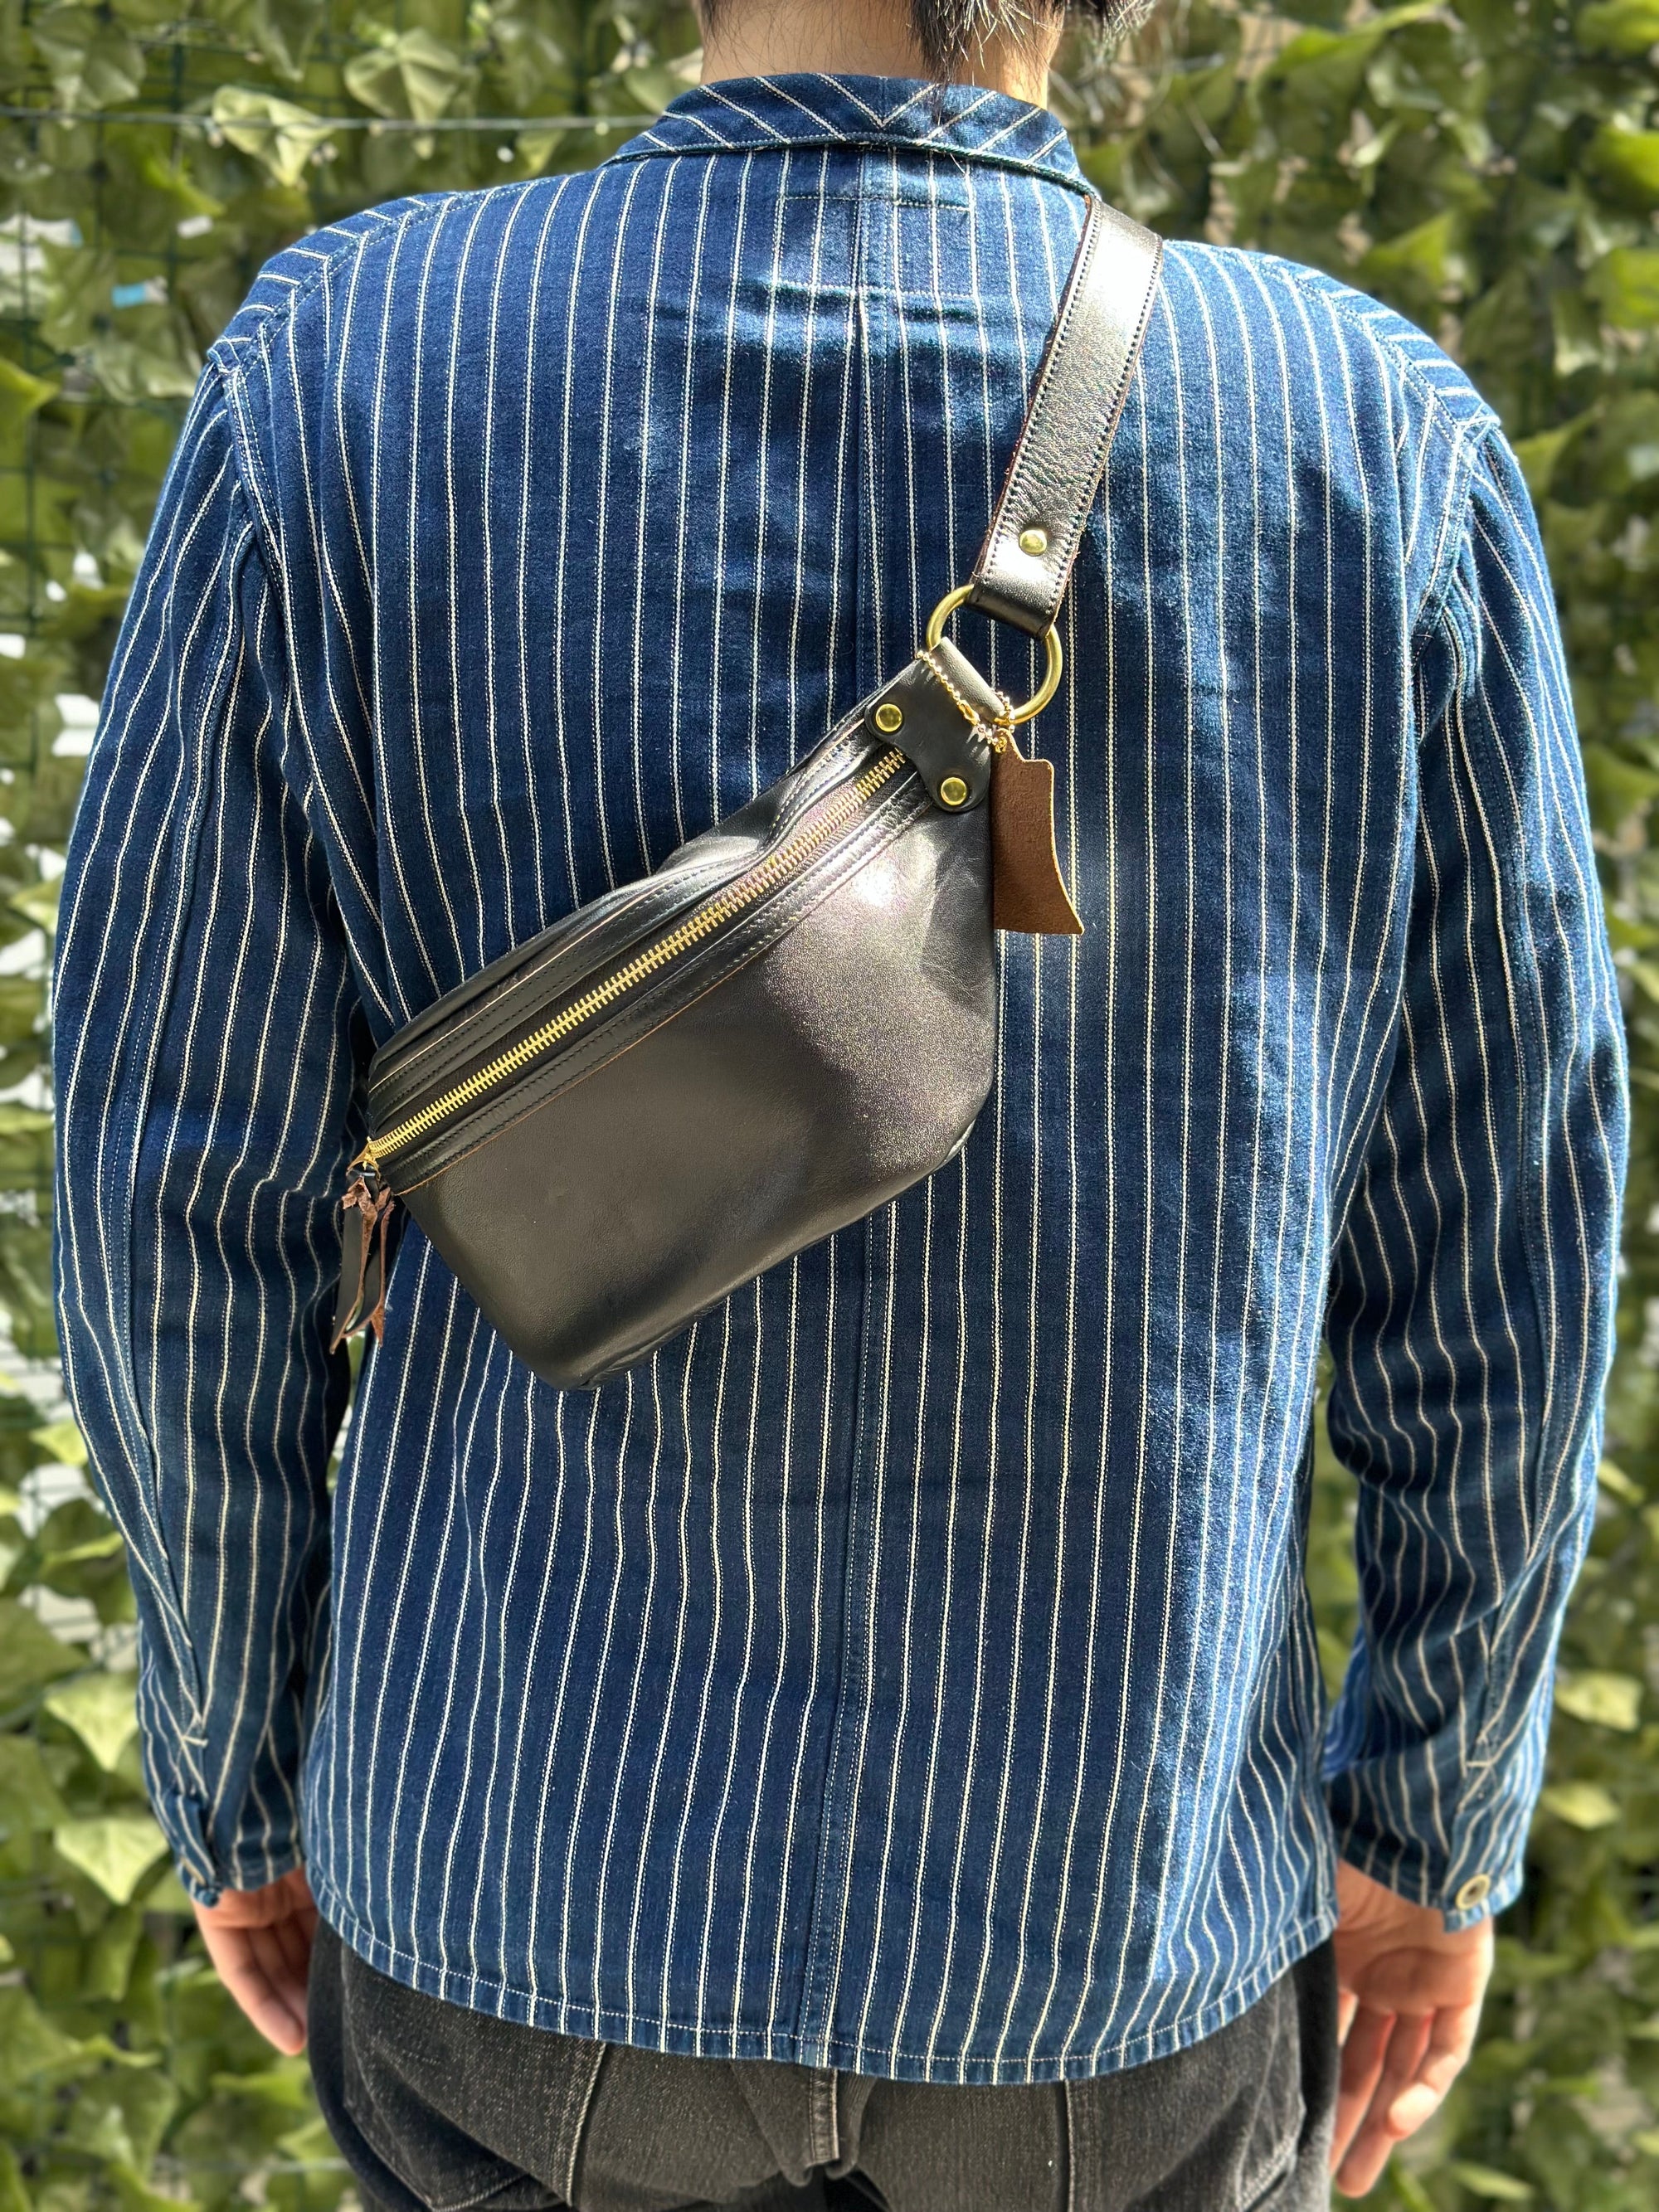 Inception by Accel Co. Horsebutt "Funky" Shoulder Bag (Brown Tea-core)